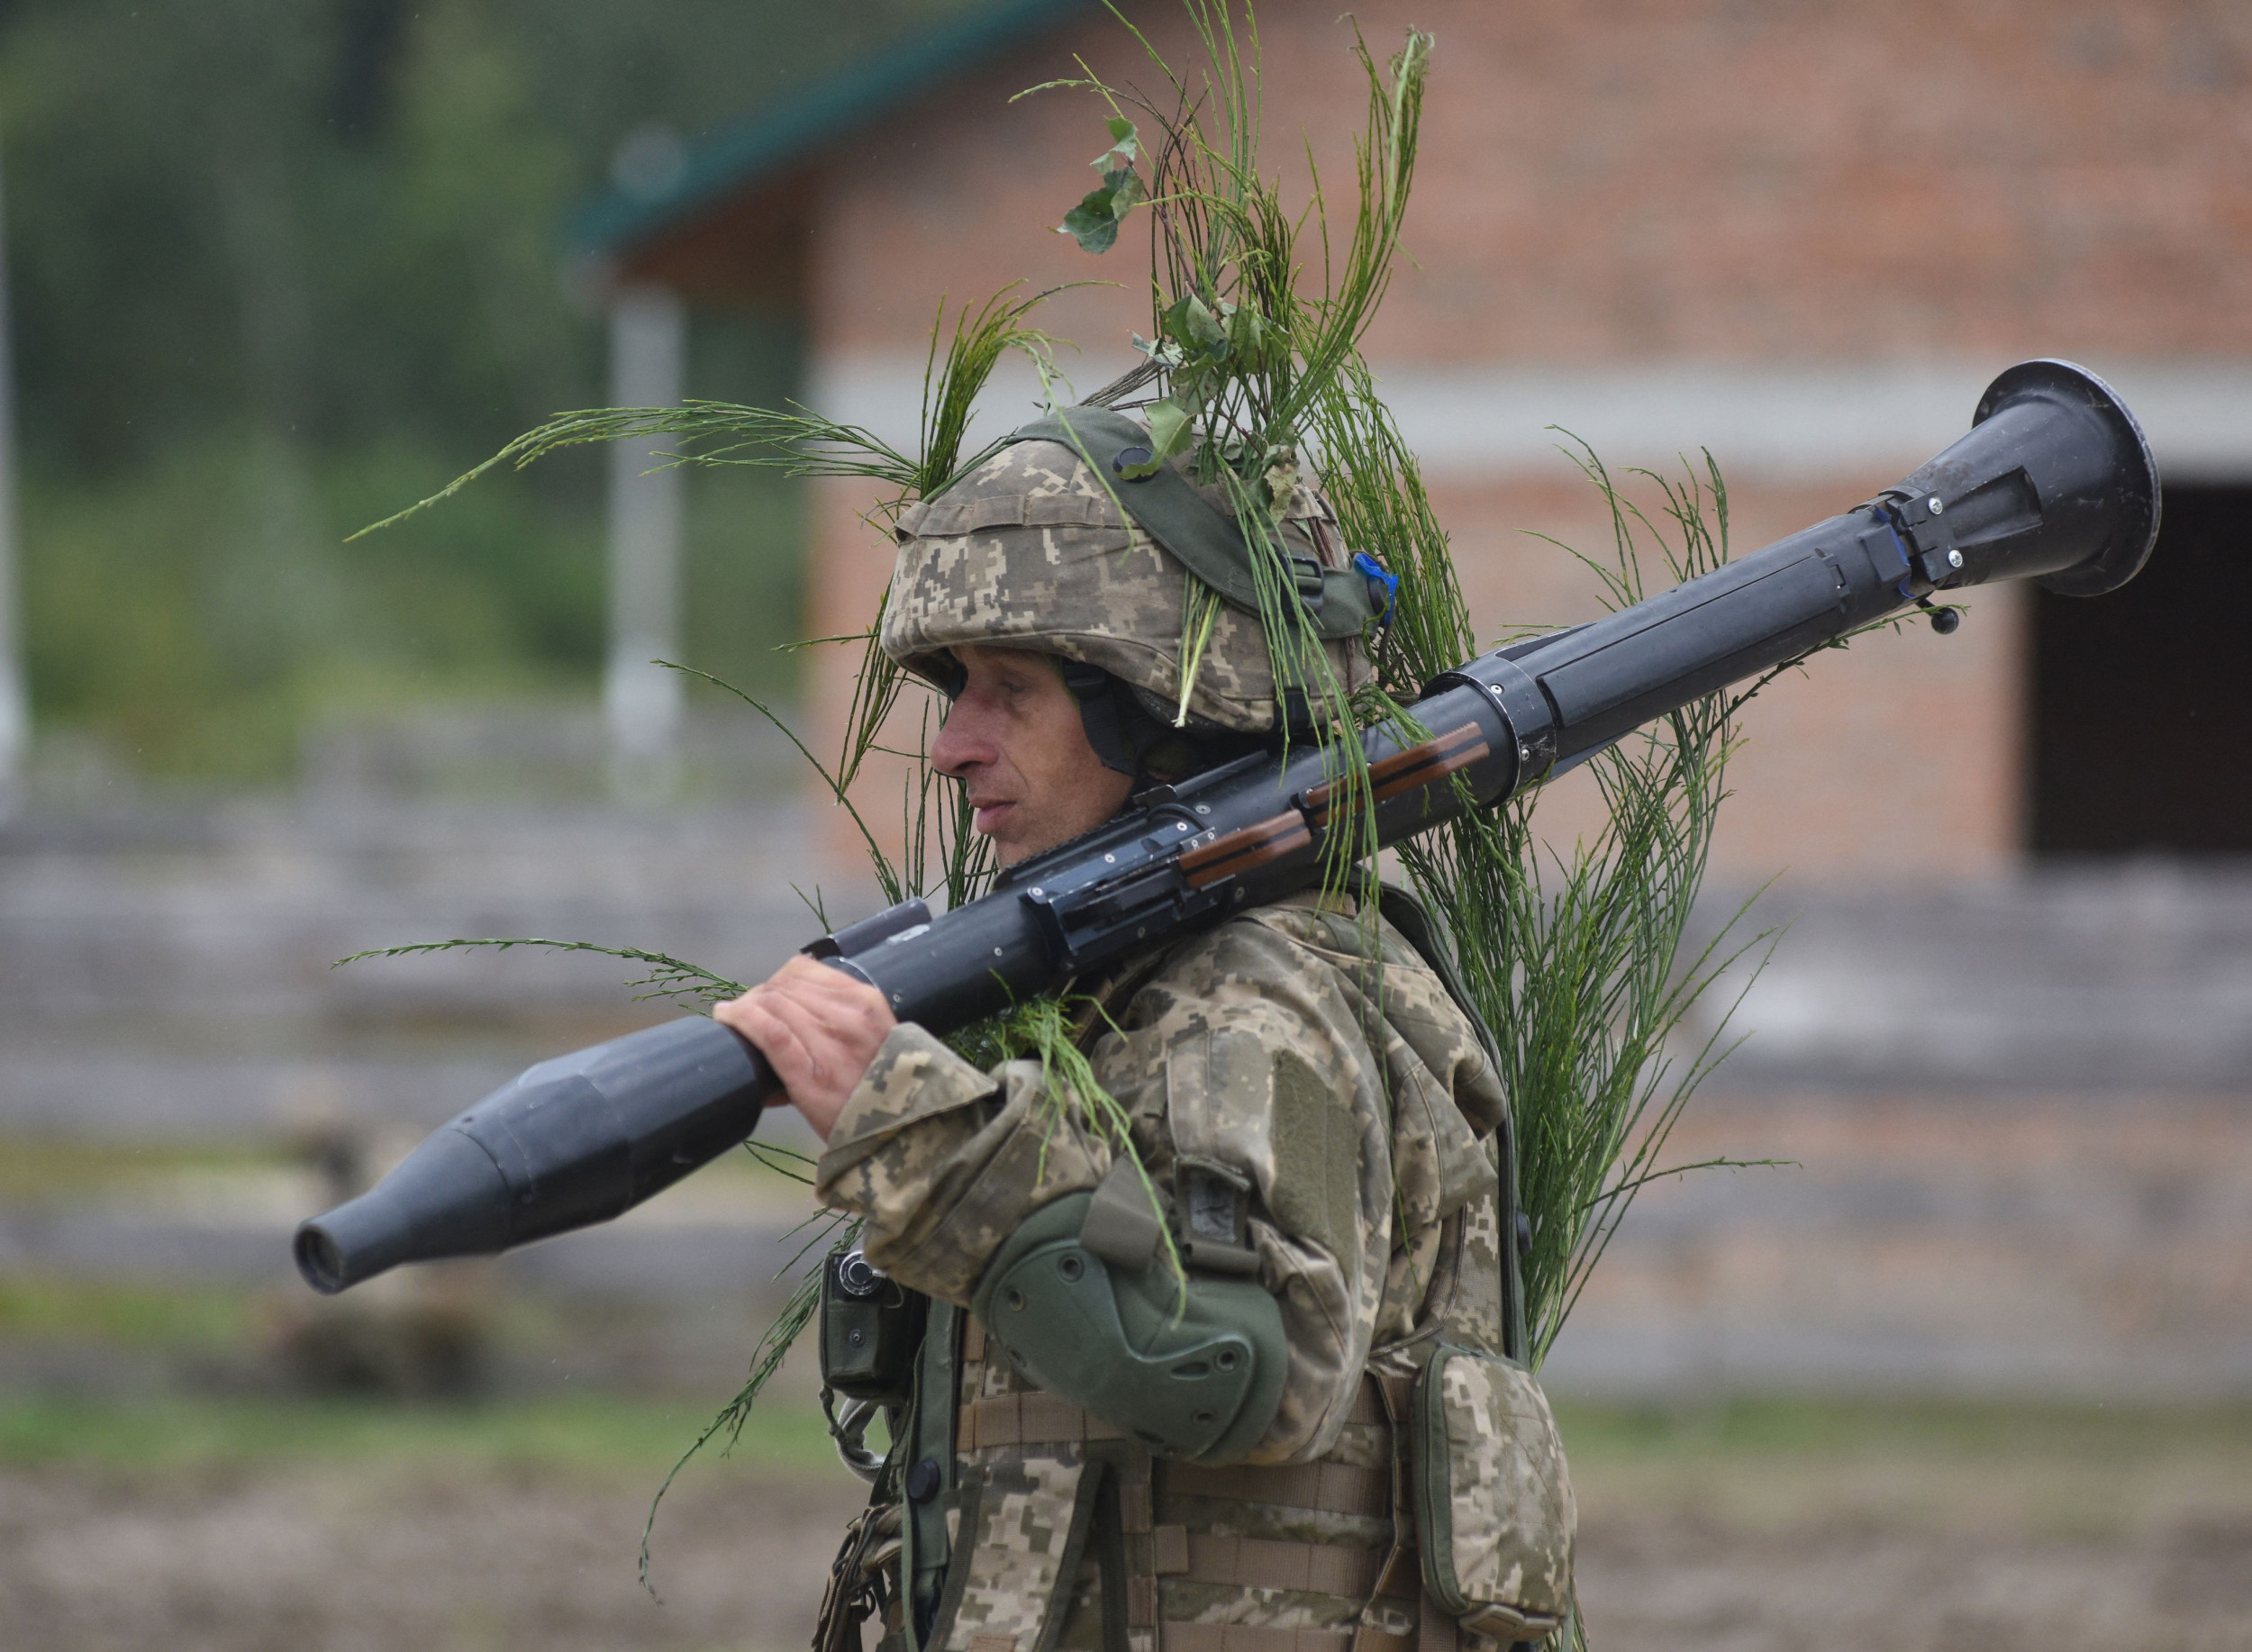 ukrainian serviceman | Ukraine Condemns Ceasefire Violations by Russia-Backed Troops as Invasion Fears Rise | The Paradise